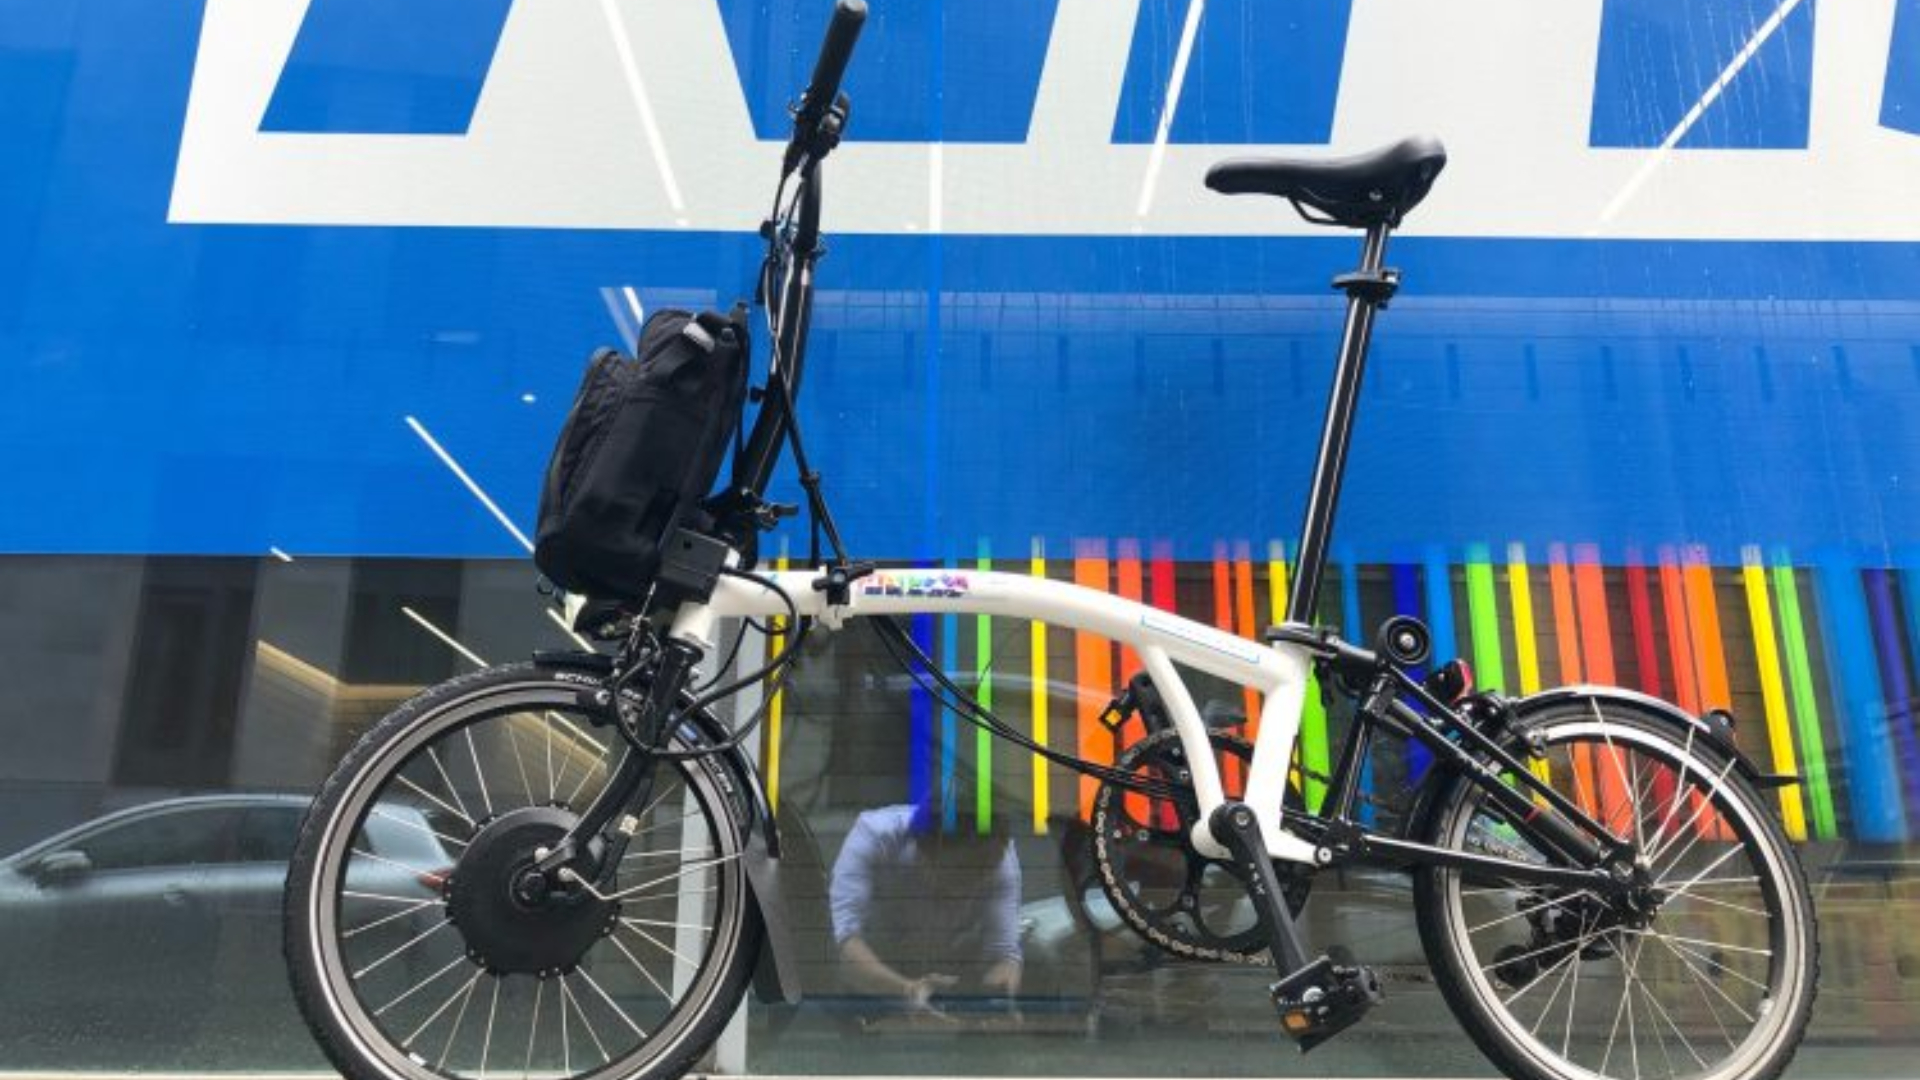 Brompton e-bike, unfolded and outside a hospital for NHS staff use